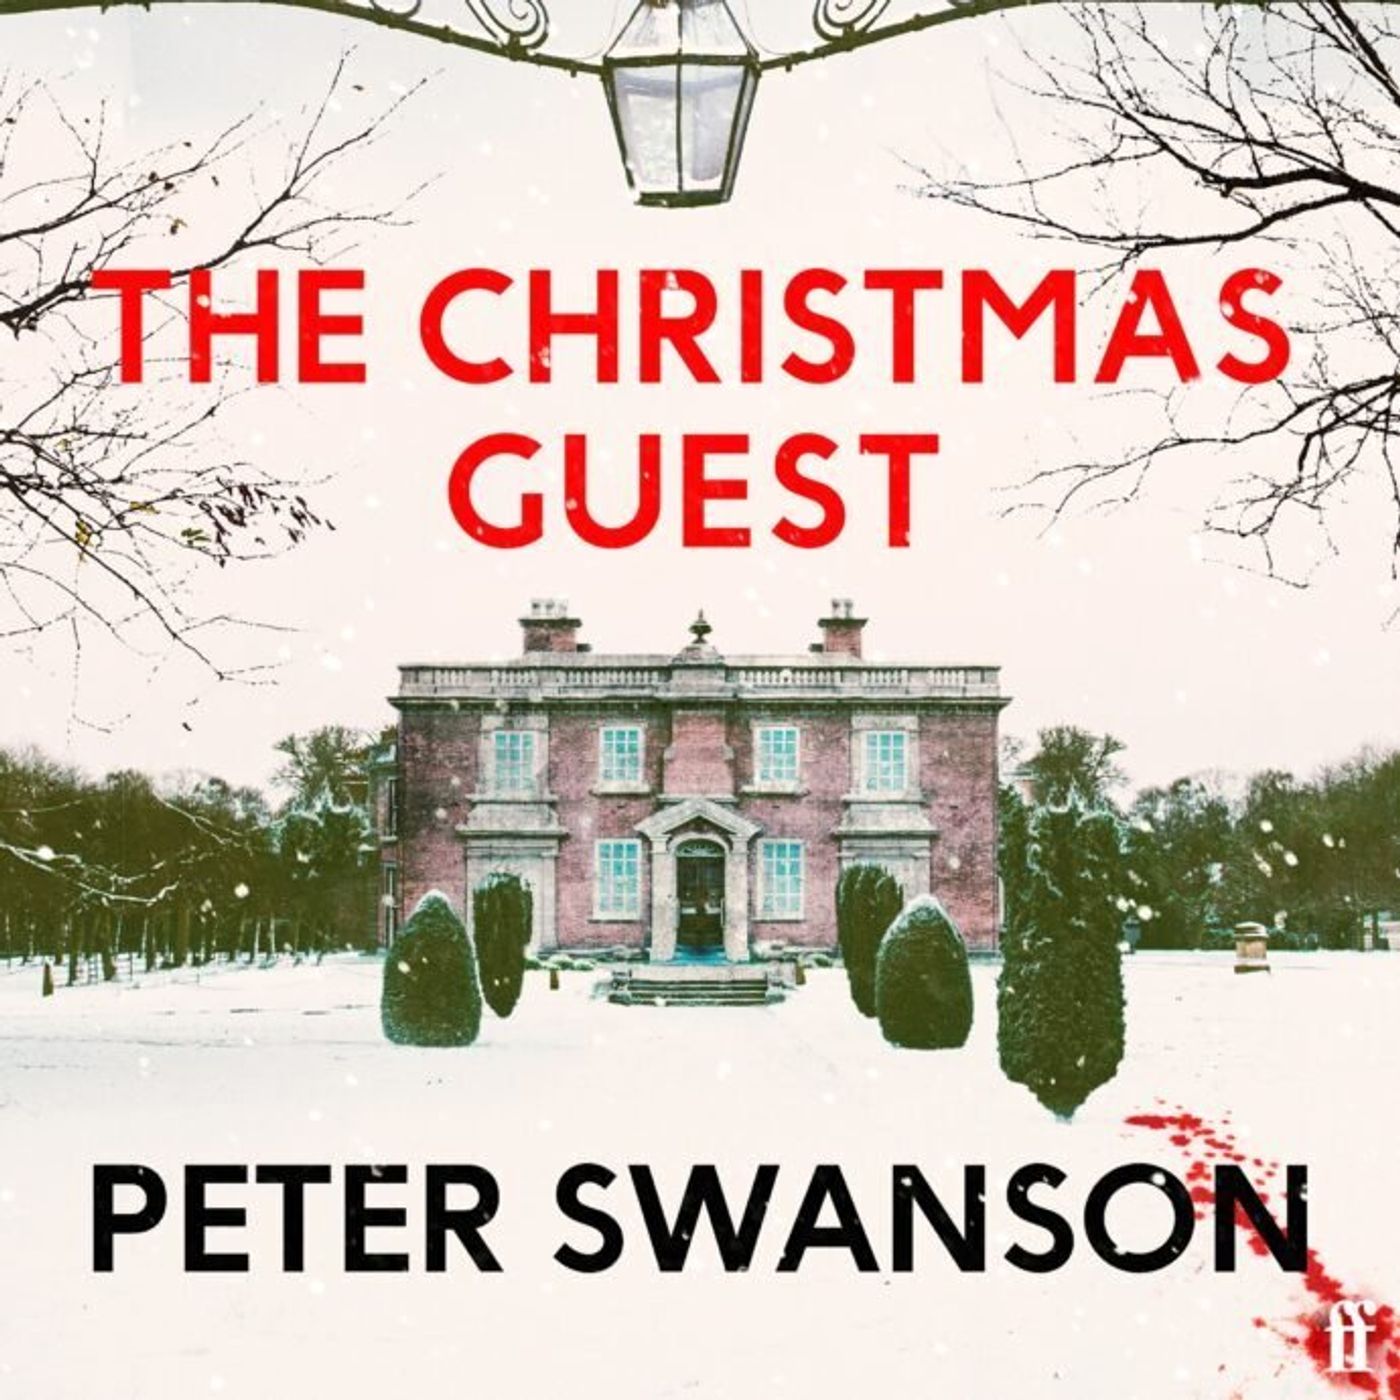 350: Peter Swanson - The Christmas Guest